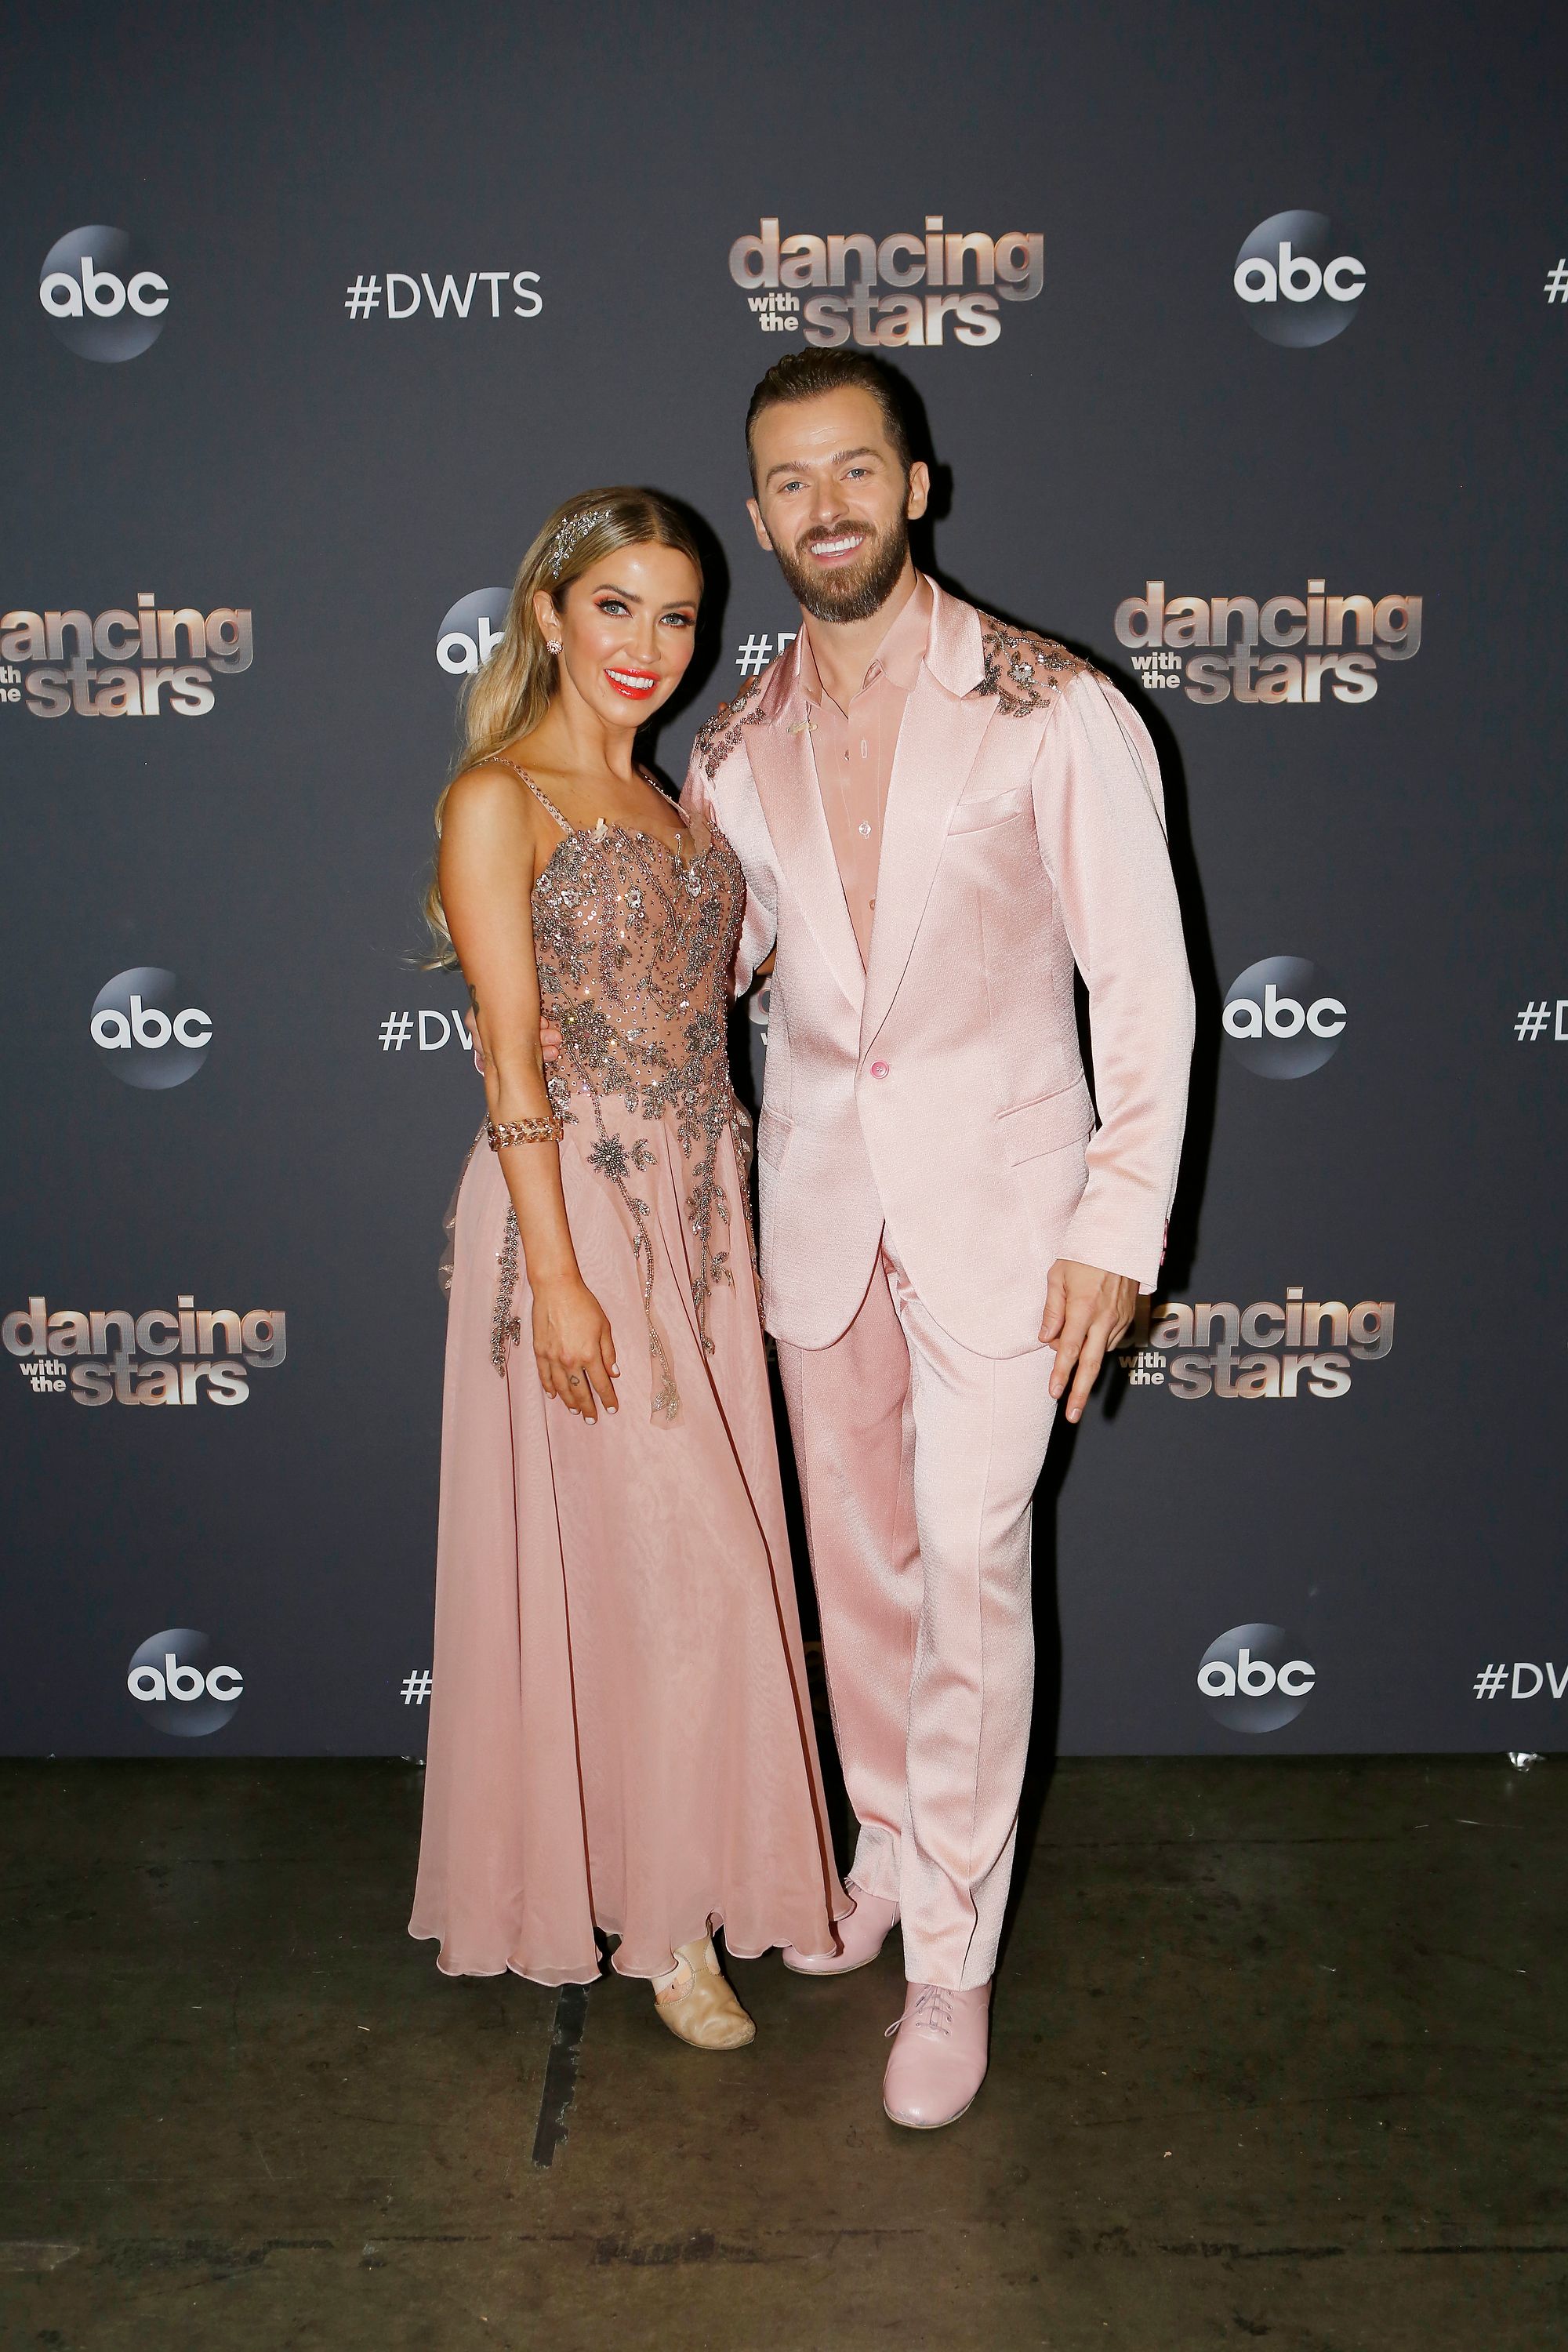 Kaitlyn Bristowe and Artem Chigvintsev on the first elimination round of "Dancing with the Stars" on September 22, 2020 | Photo: Kelsey McNeal/ABC/Getty Images